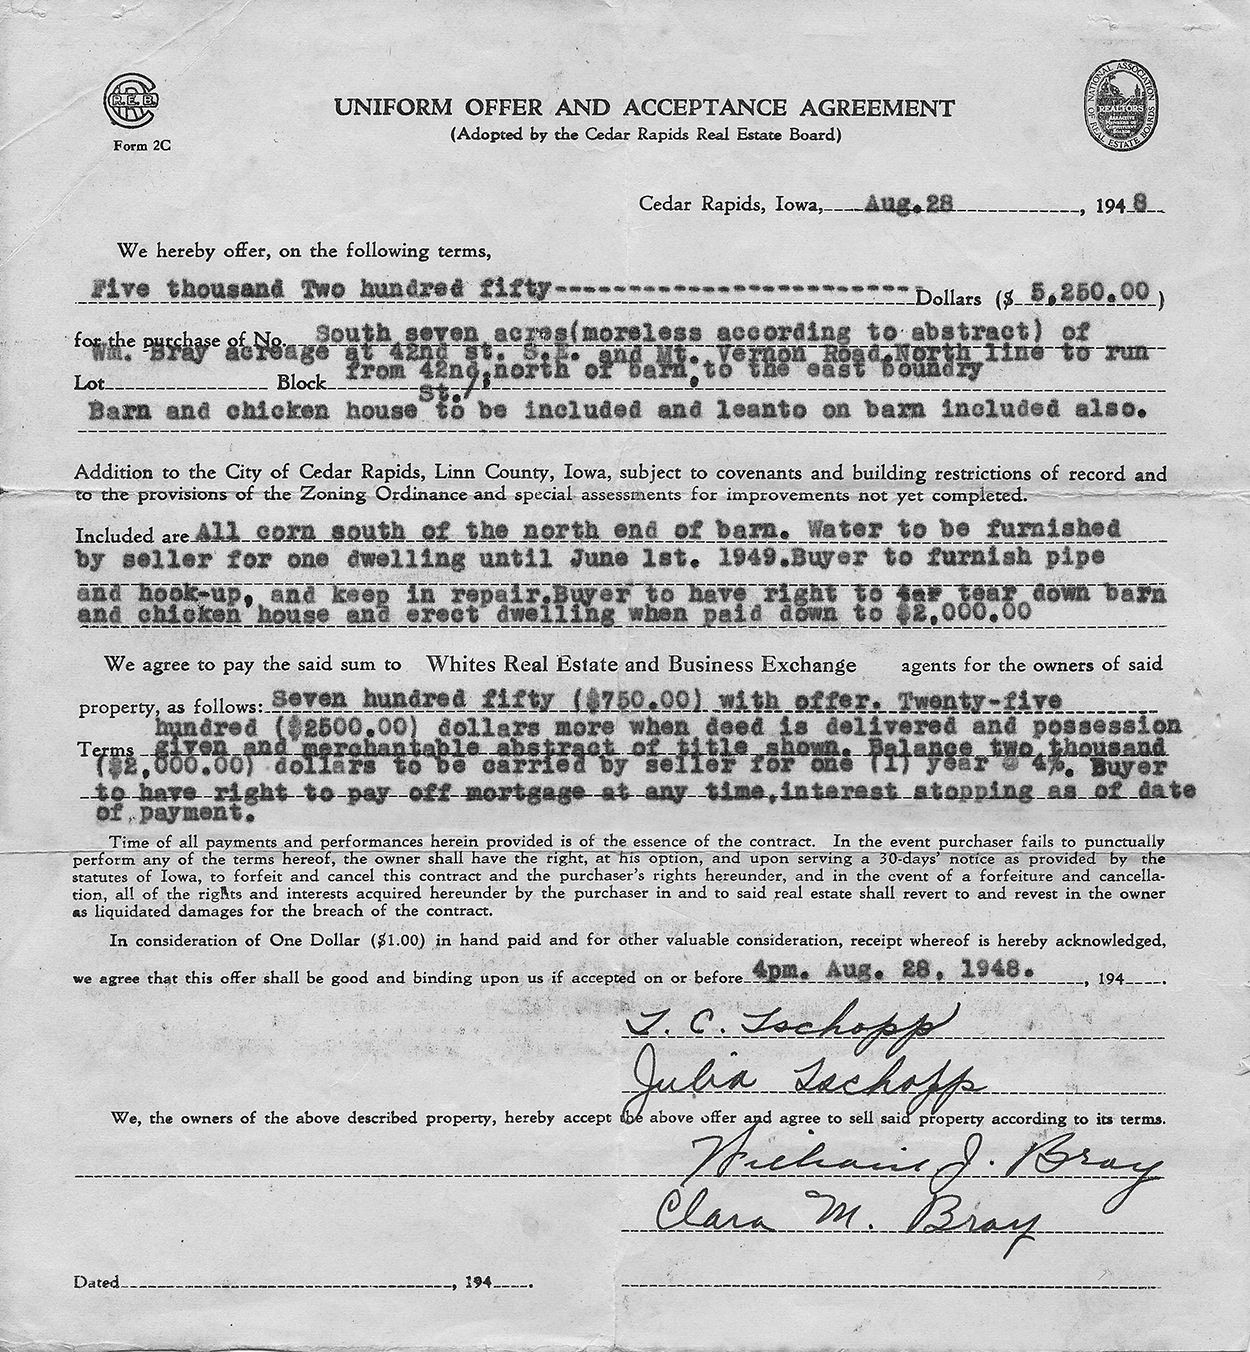 Copy of the purchase agreement for 1006